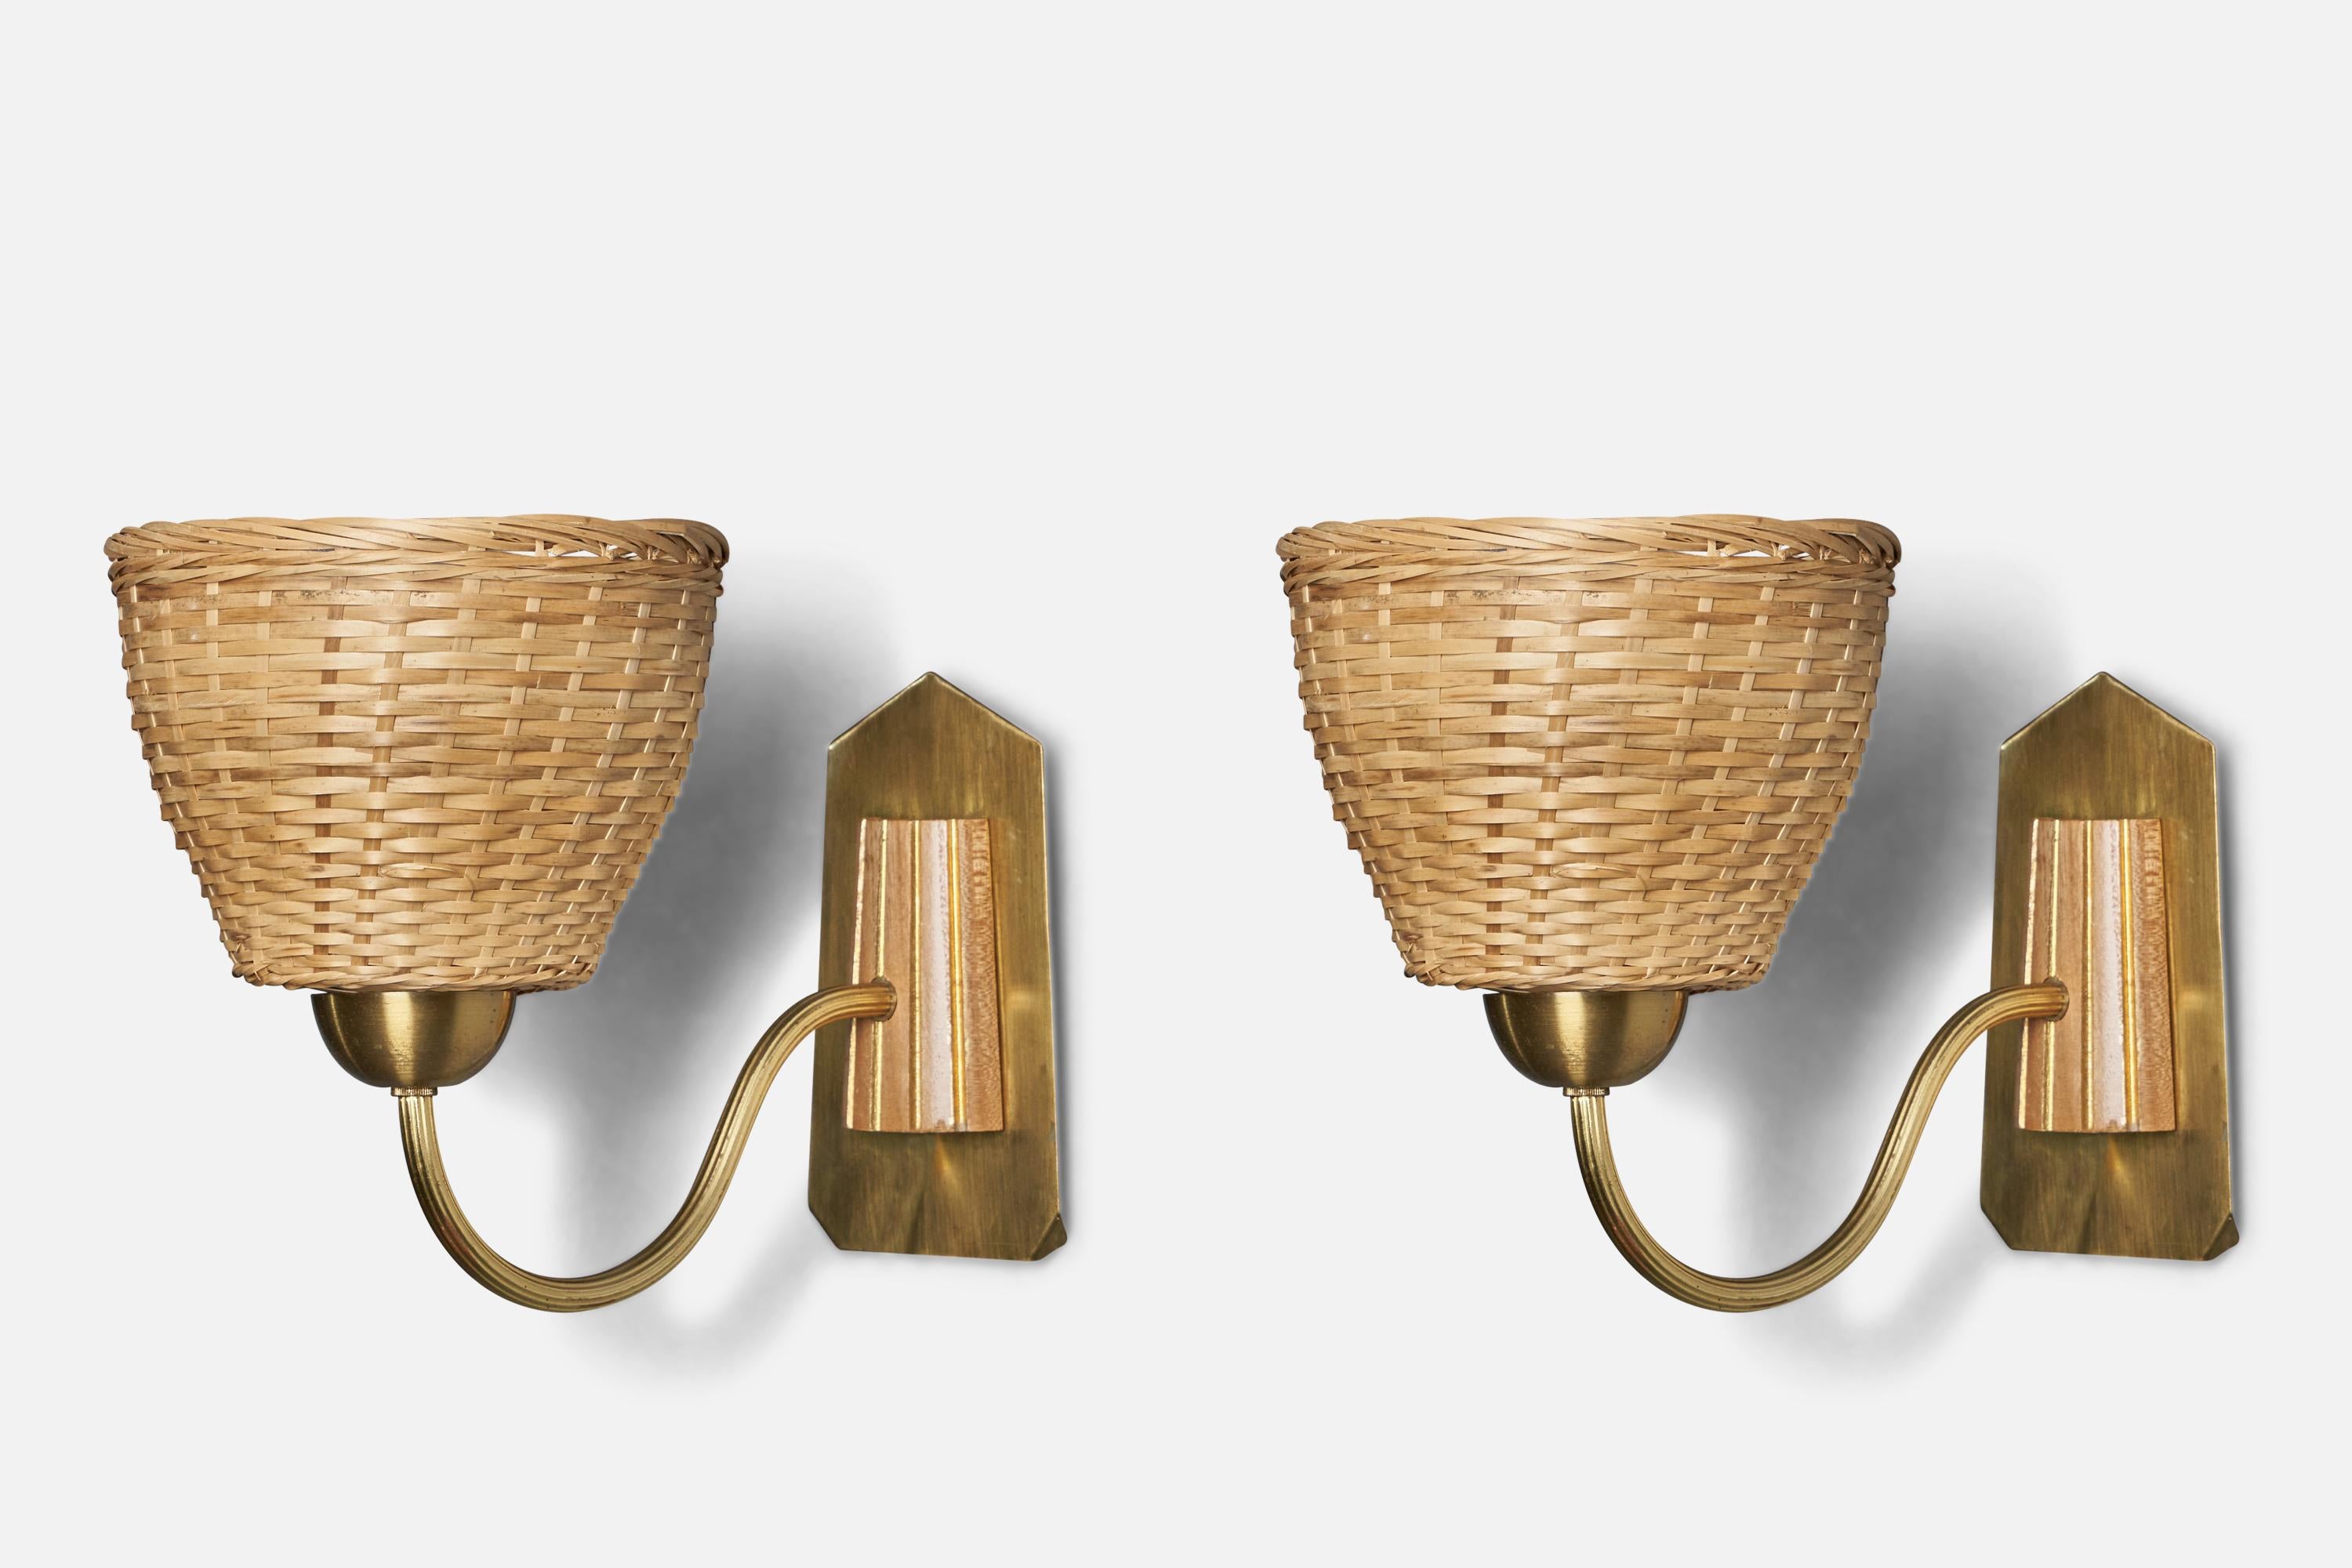 A pair of brass, oak and rattan wall lights designed and produced in Sweden, c. 1970s.

Overall Dimensions (inches): 8” H x 6.9” W x 11” D
Bulb Specifications: E-14 Bulb
Number of Sockets: 1